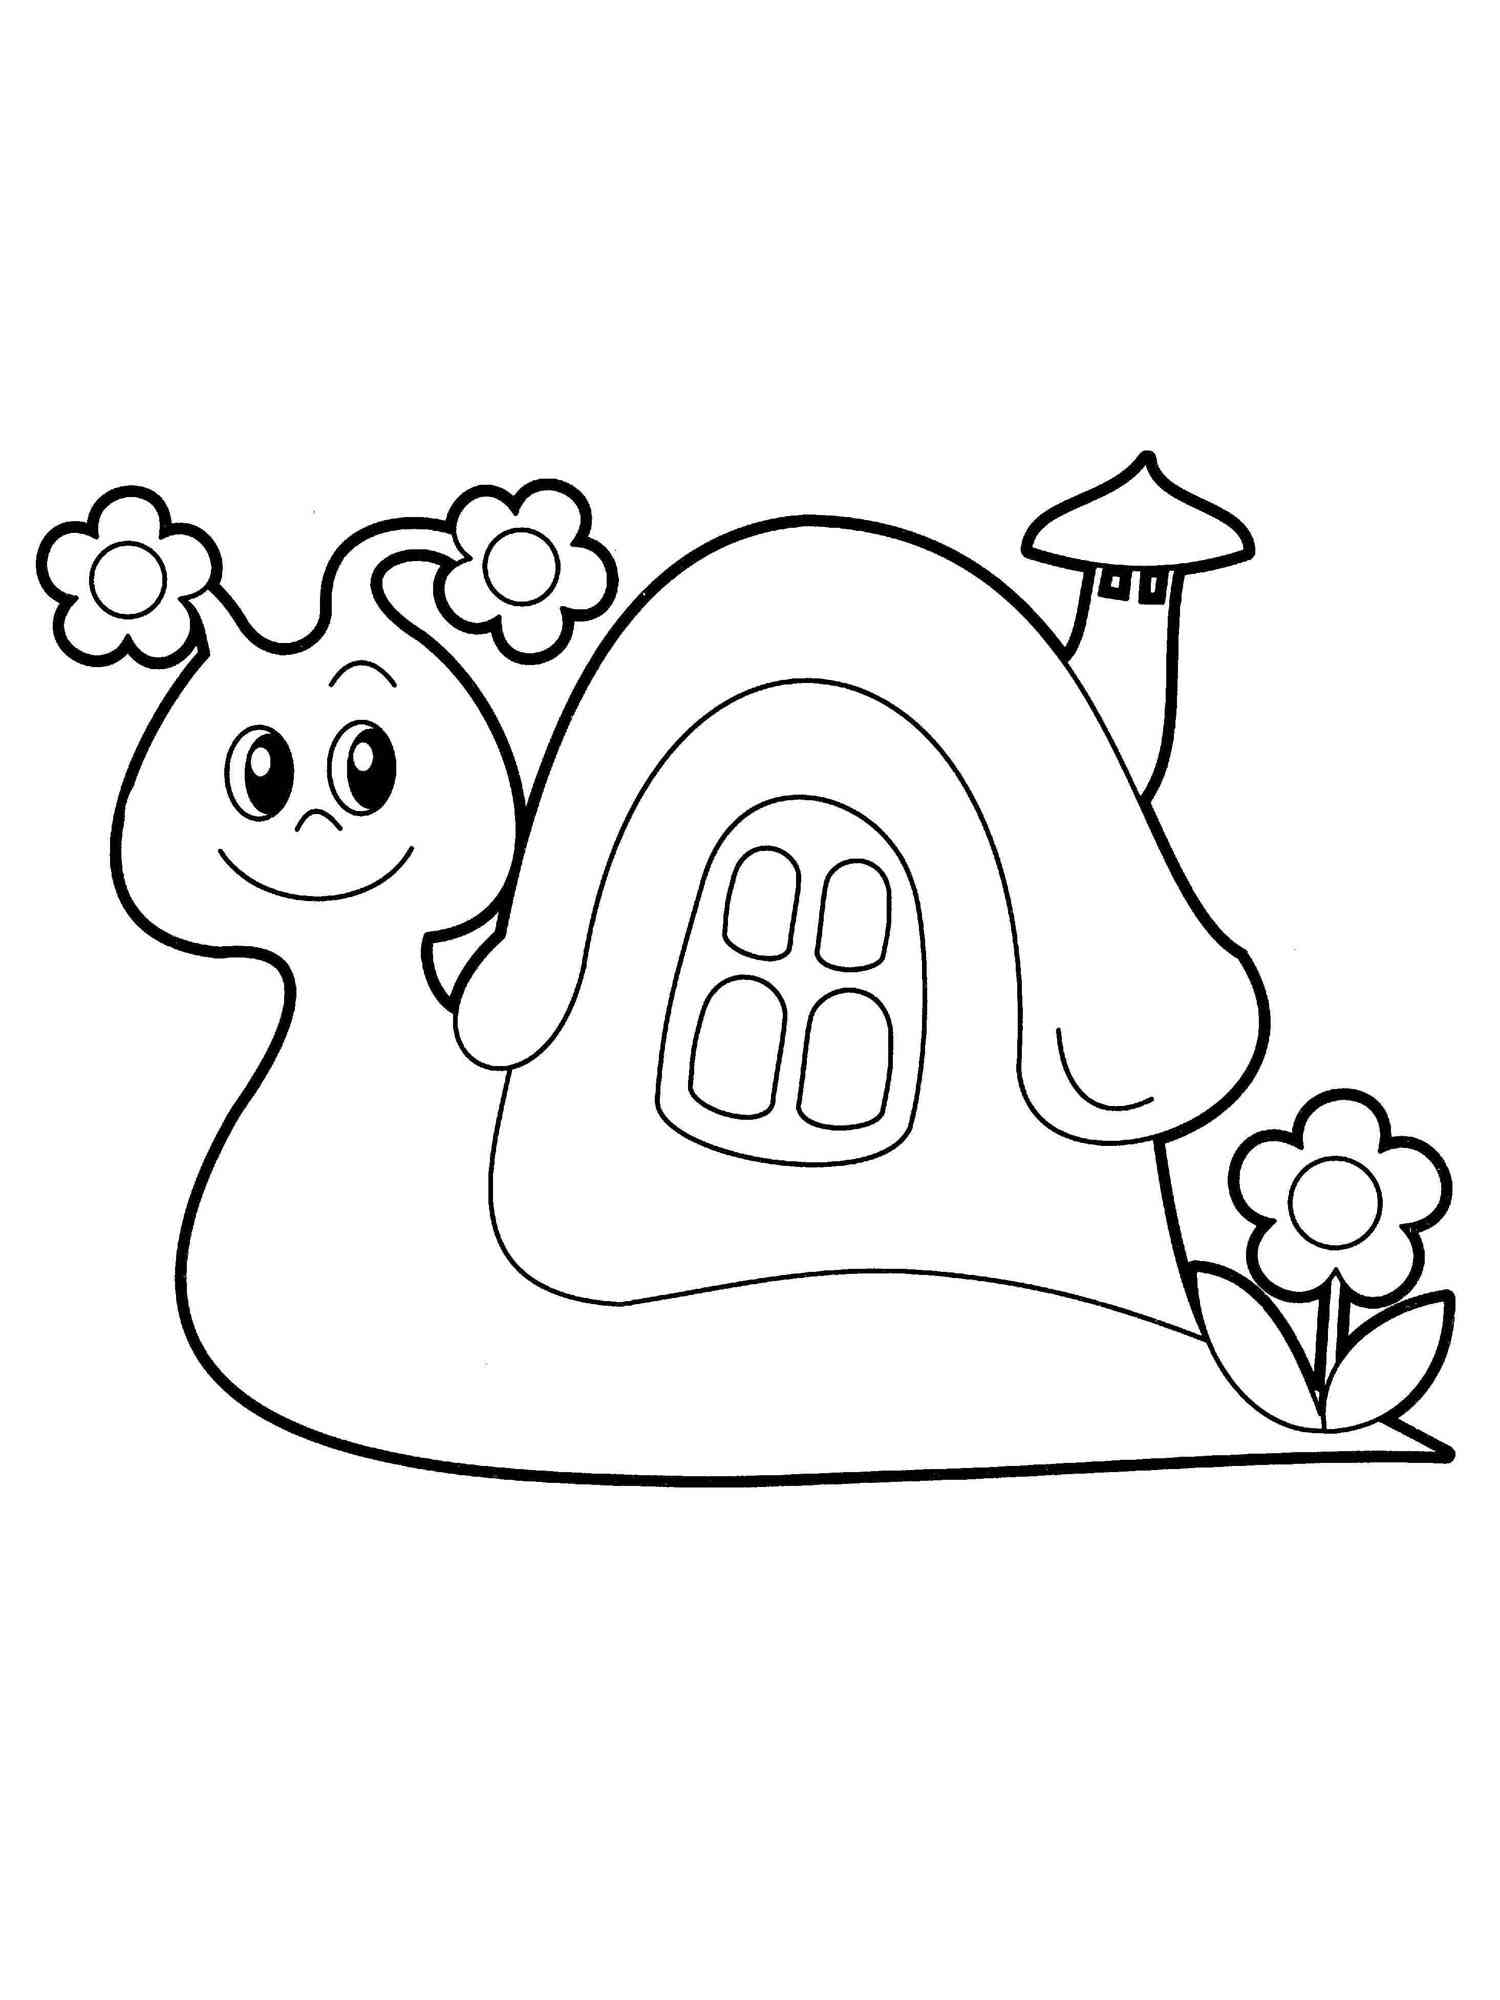 Snail with a House on his back coloring page